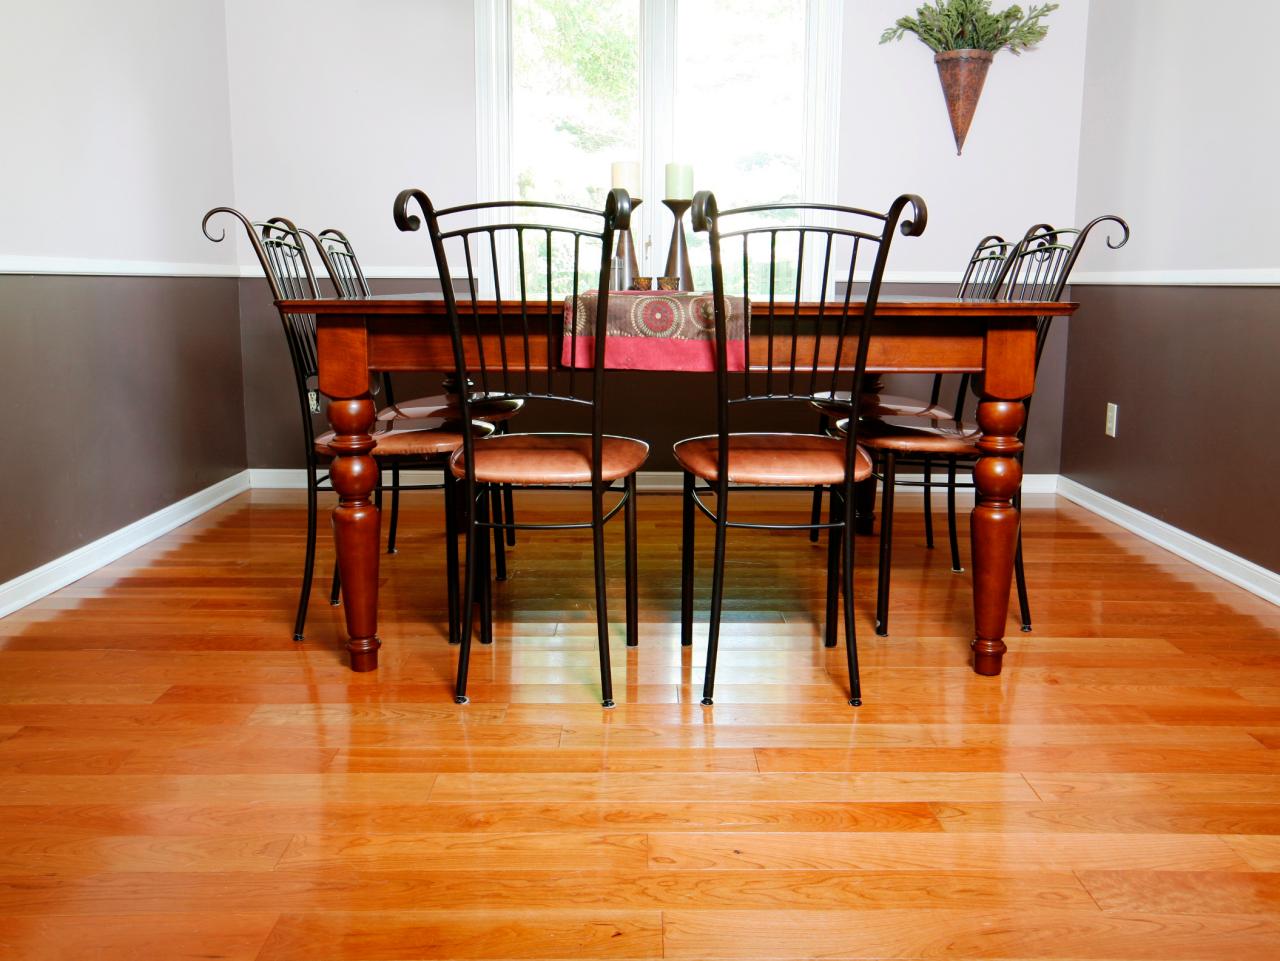 How To Install Prefinished Solid, Hardwood Flooring For Less Than $1.00